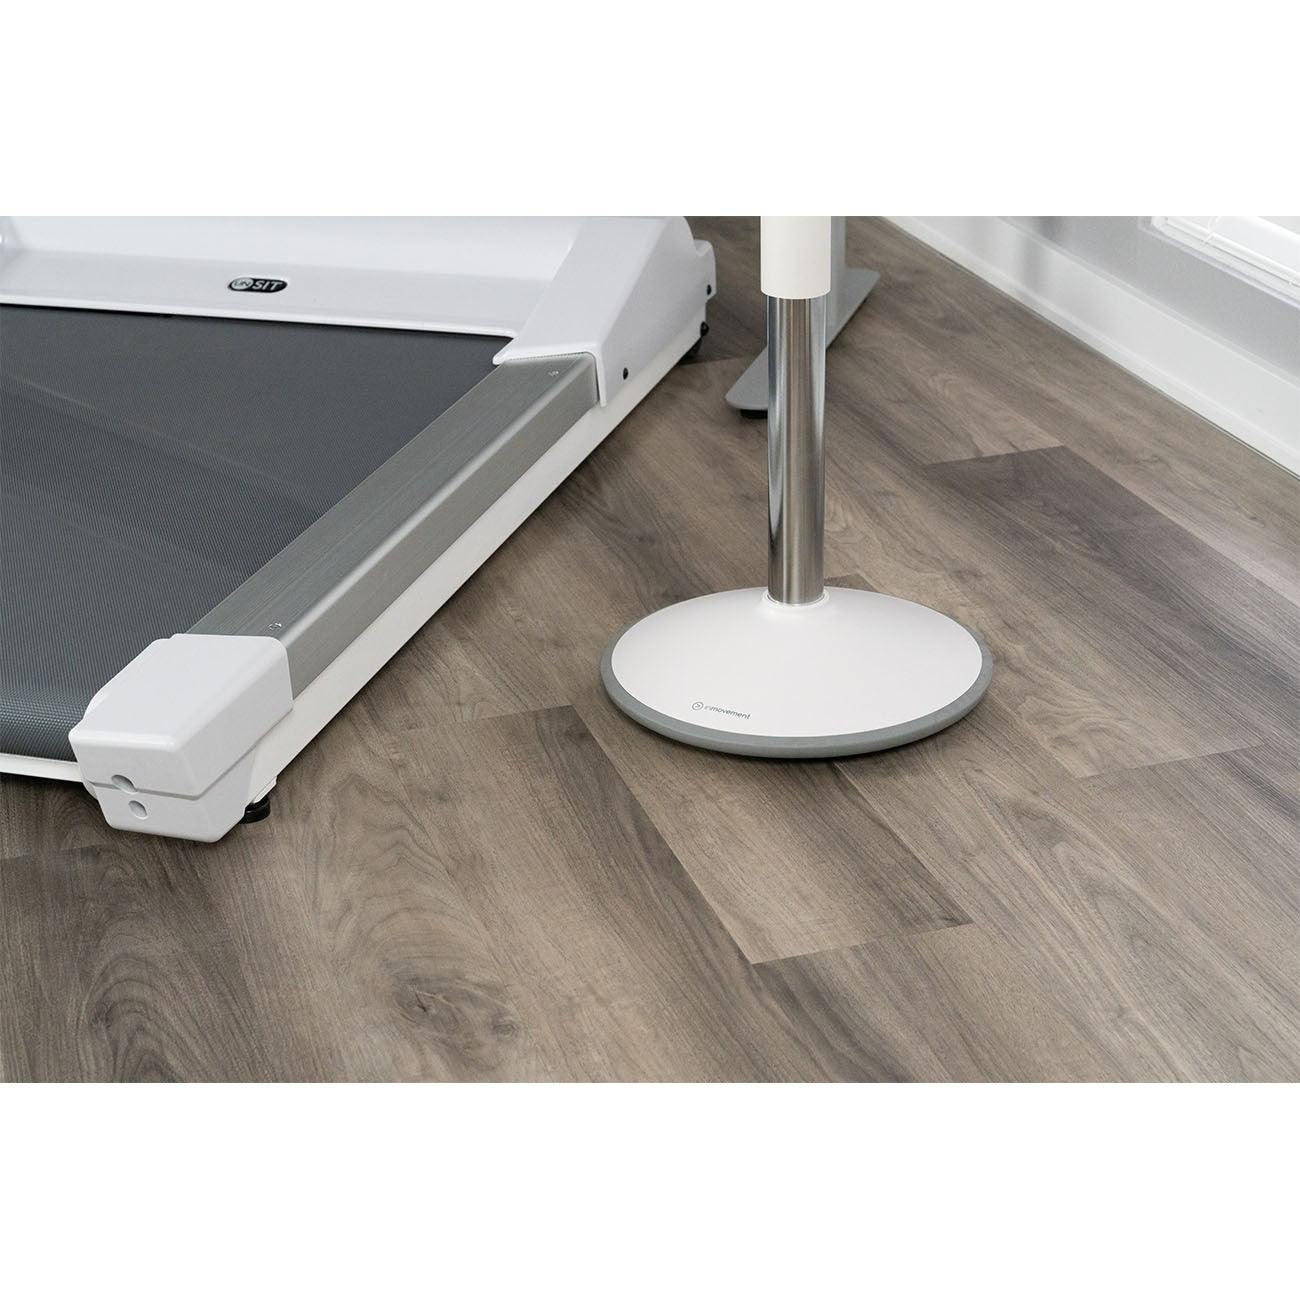 Energy Stool's soft, rounded base is safe for all floors and treadmill decks.